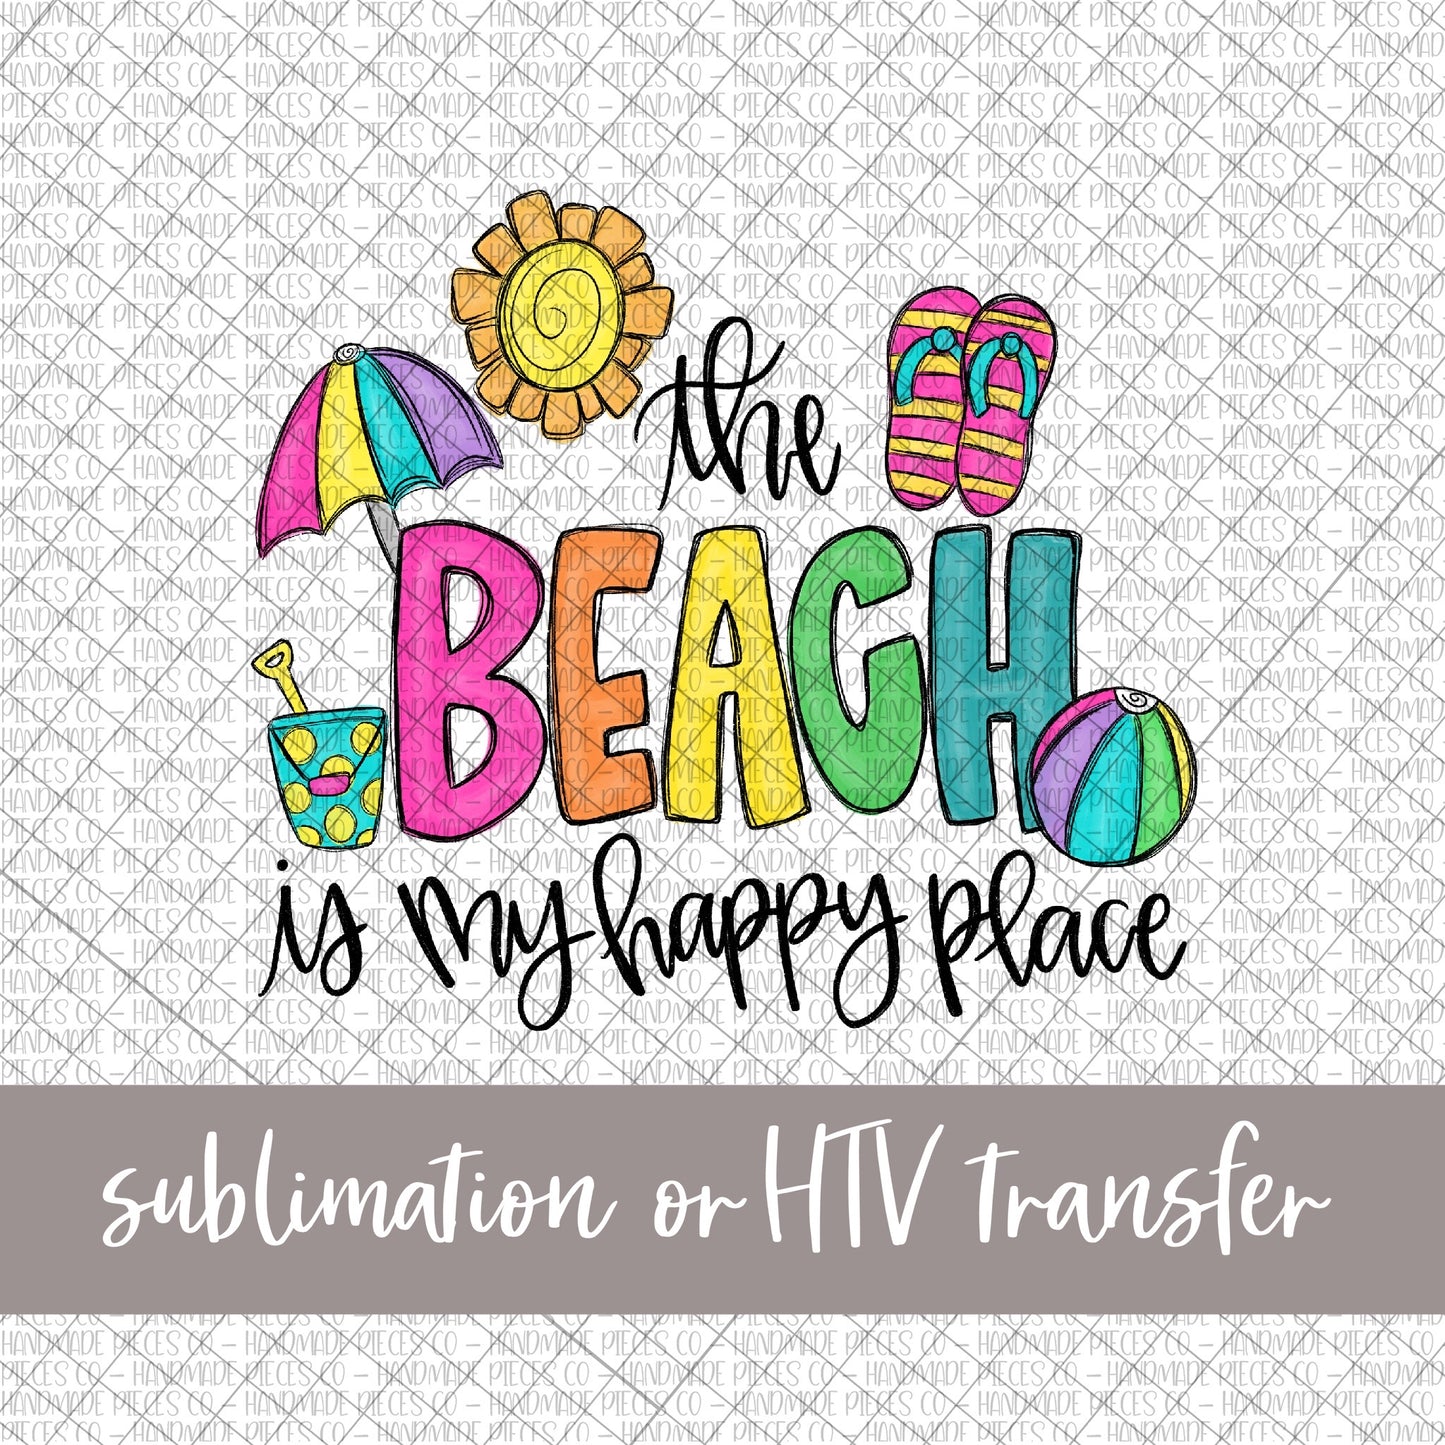 The Beach is my Happy Place, Cursive Lettering - Sublimation or HTV Transfer